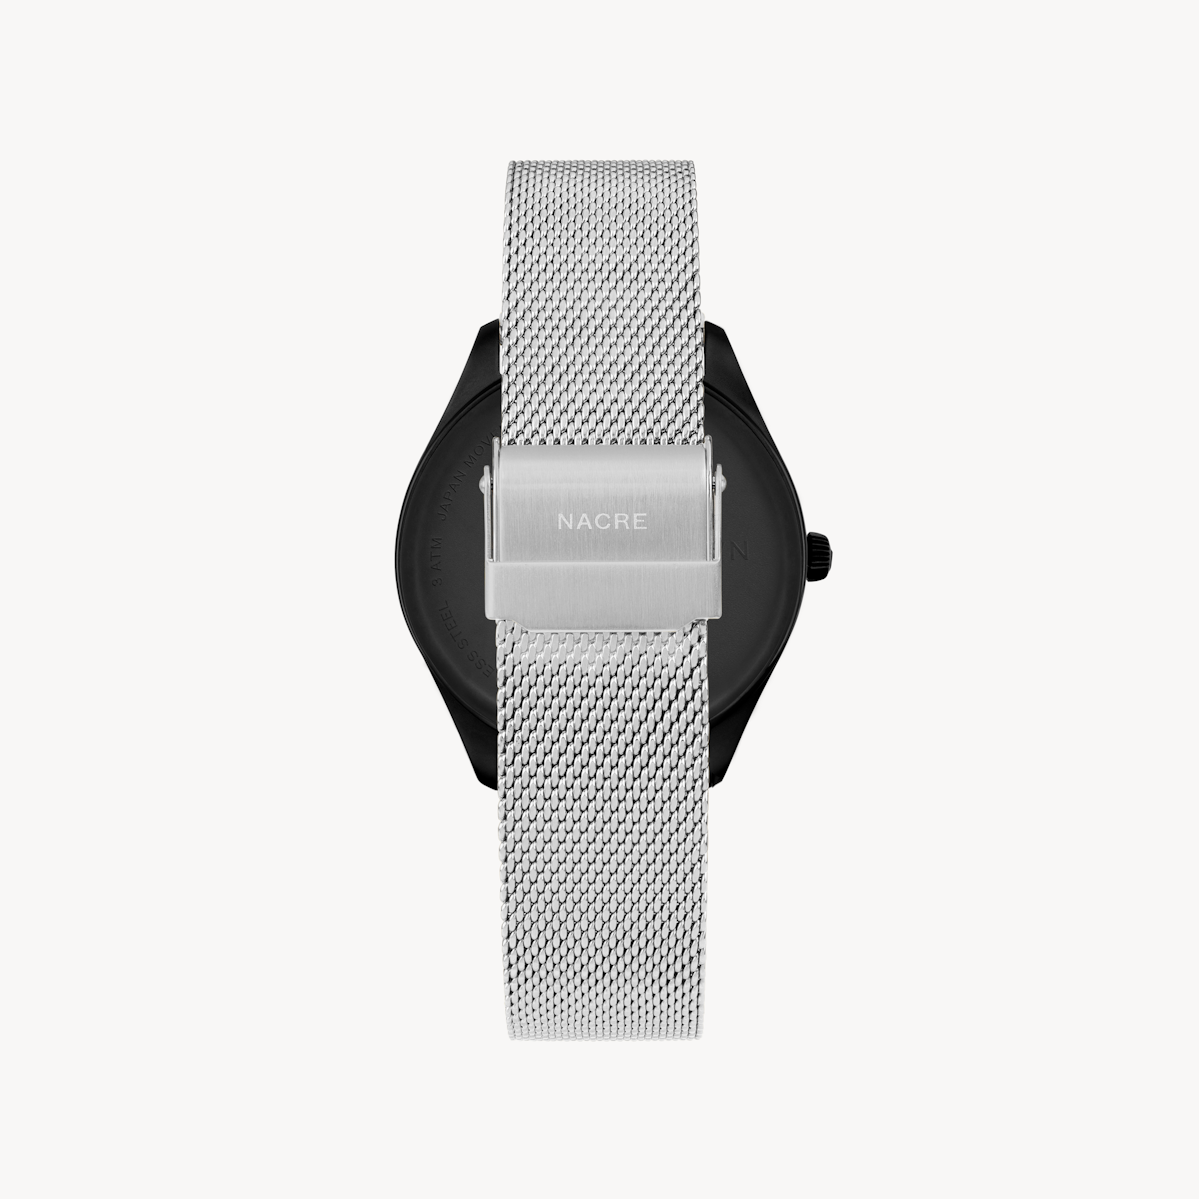 Lune 8 - Matte Black and White - Stainless Steel Mesh